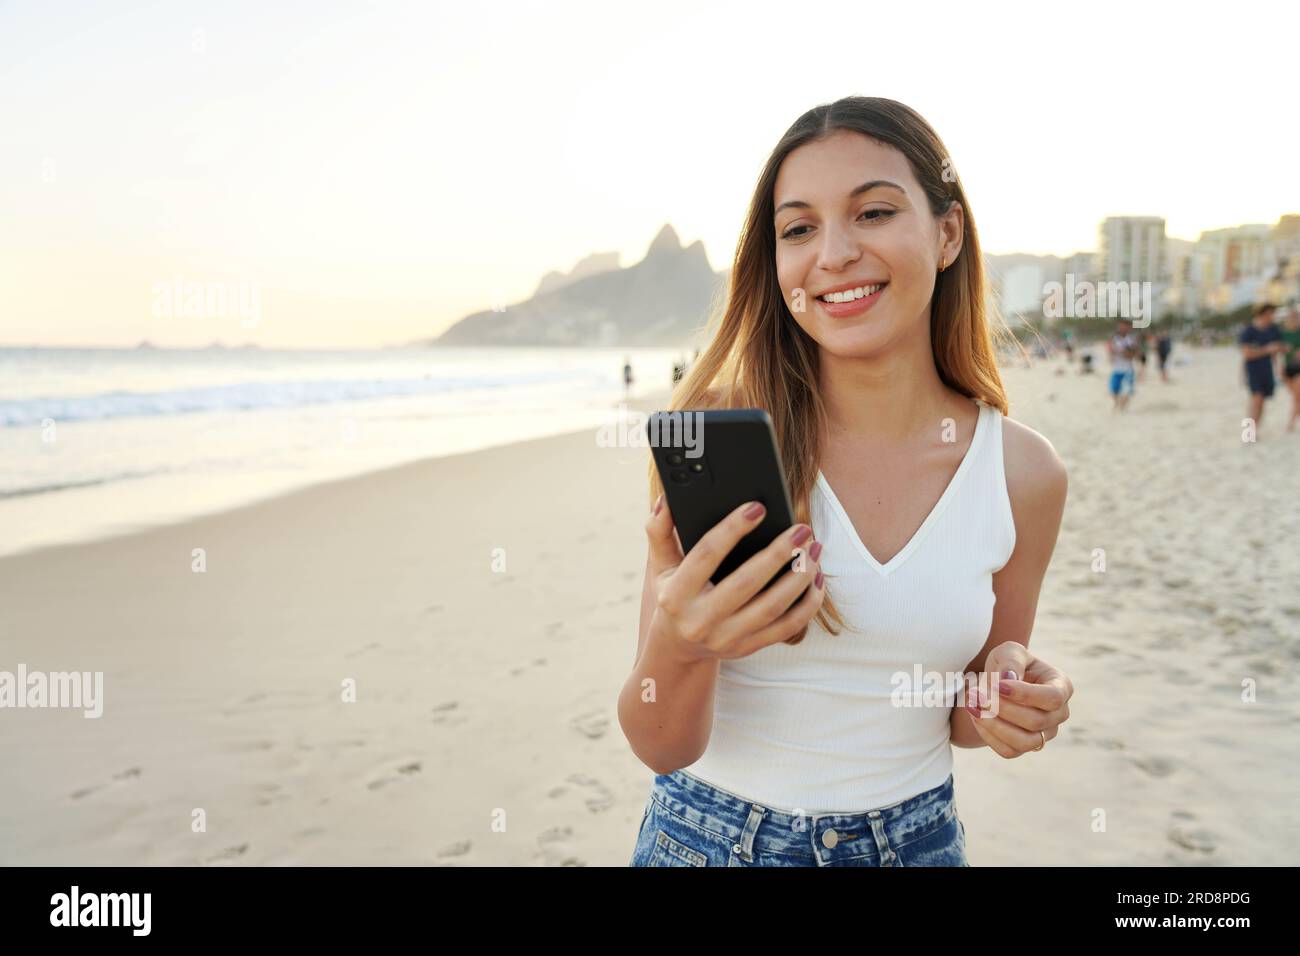 Portrait of smiling happy young Brazilian woman on Ipanema beach holding and watching her smartphone, Rio de Janeiro, Brazil Stock Photo